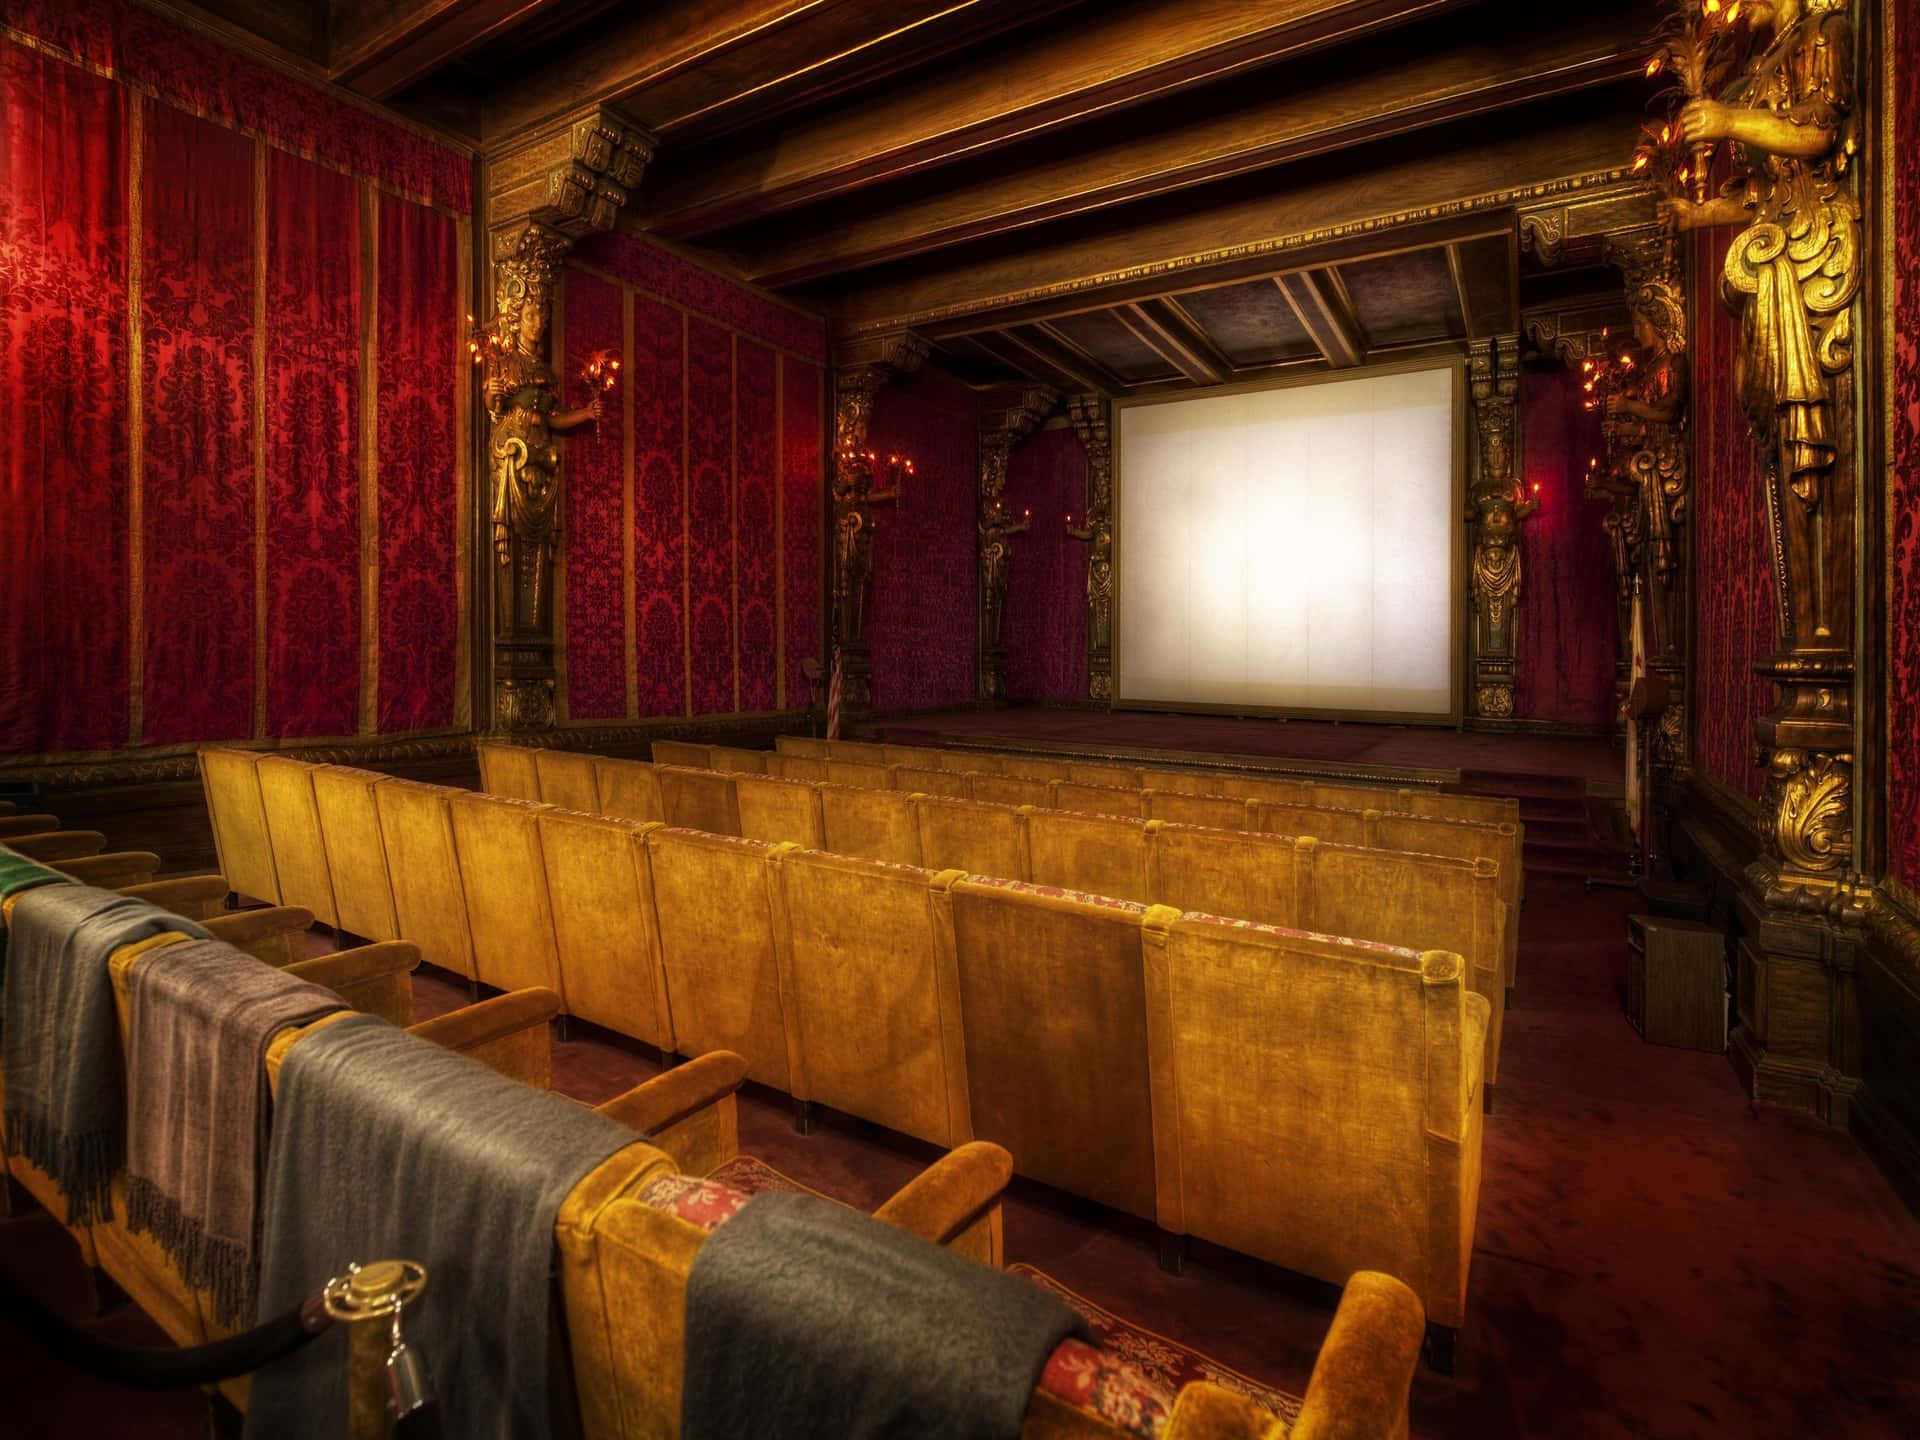 Enjoy a night of entertainment with a trip to the theater.